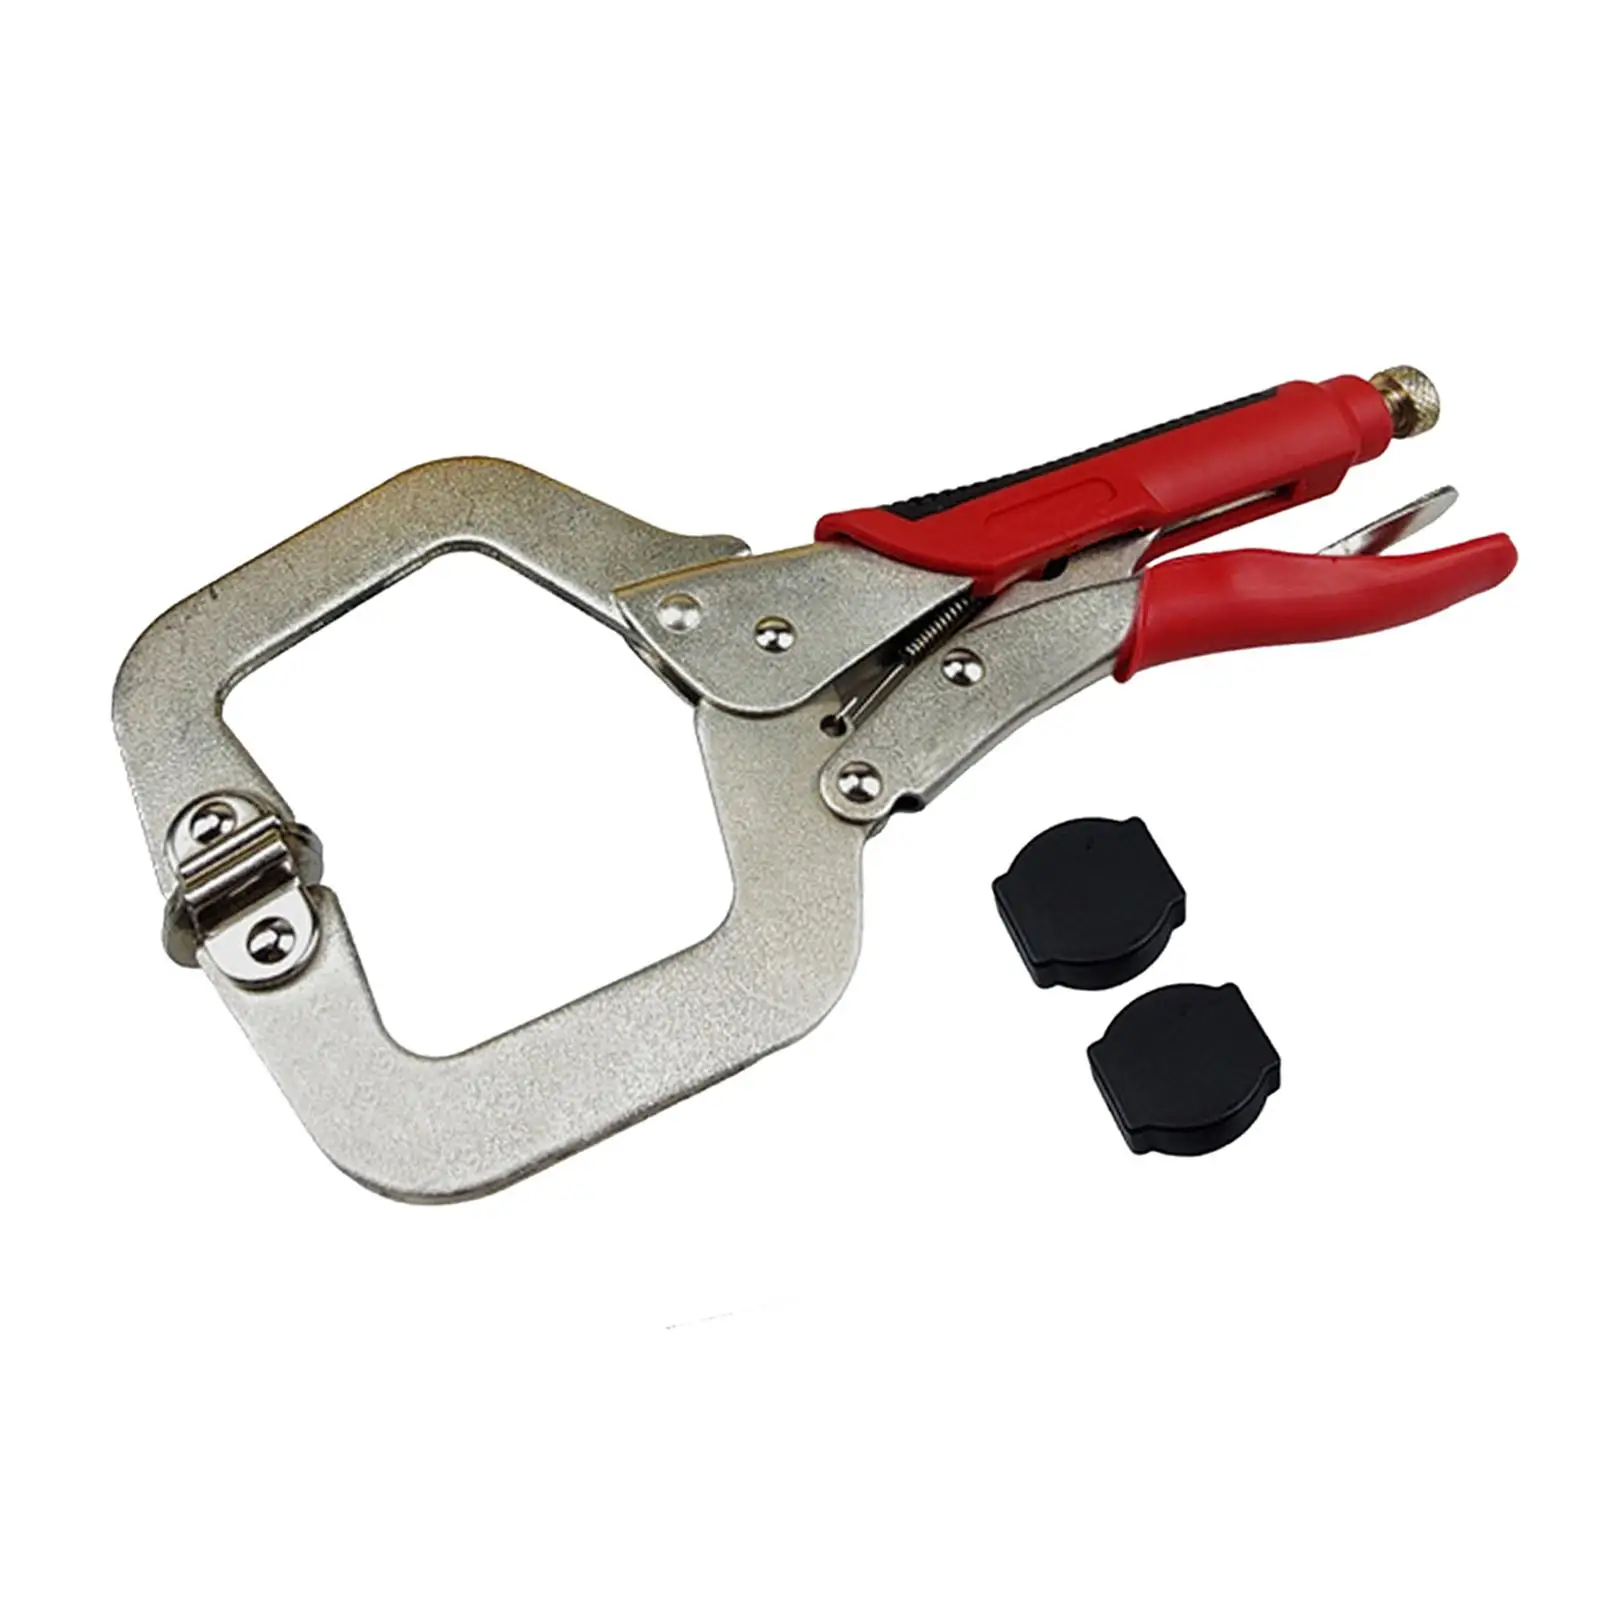 c style clamp Pocket Hole Joinery Welding vise grips Pliers Metal for Woodworkin